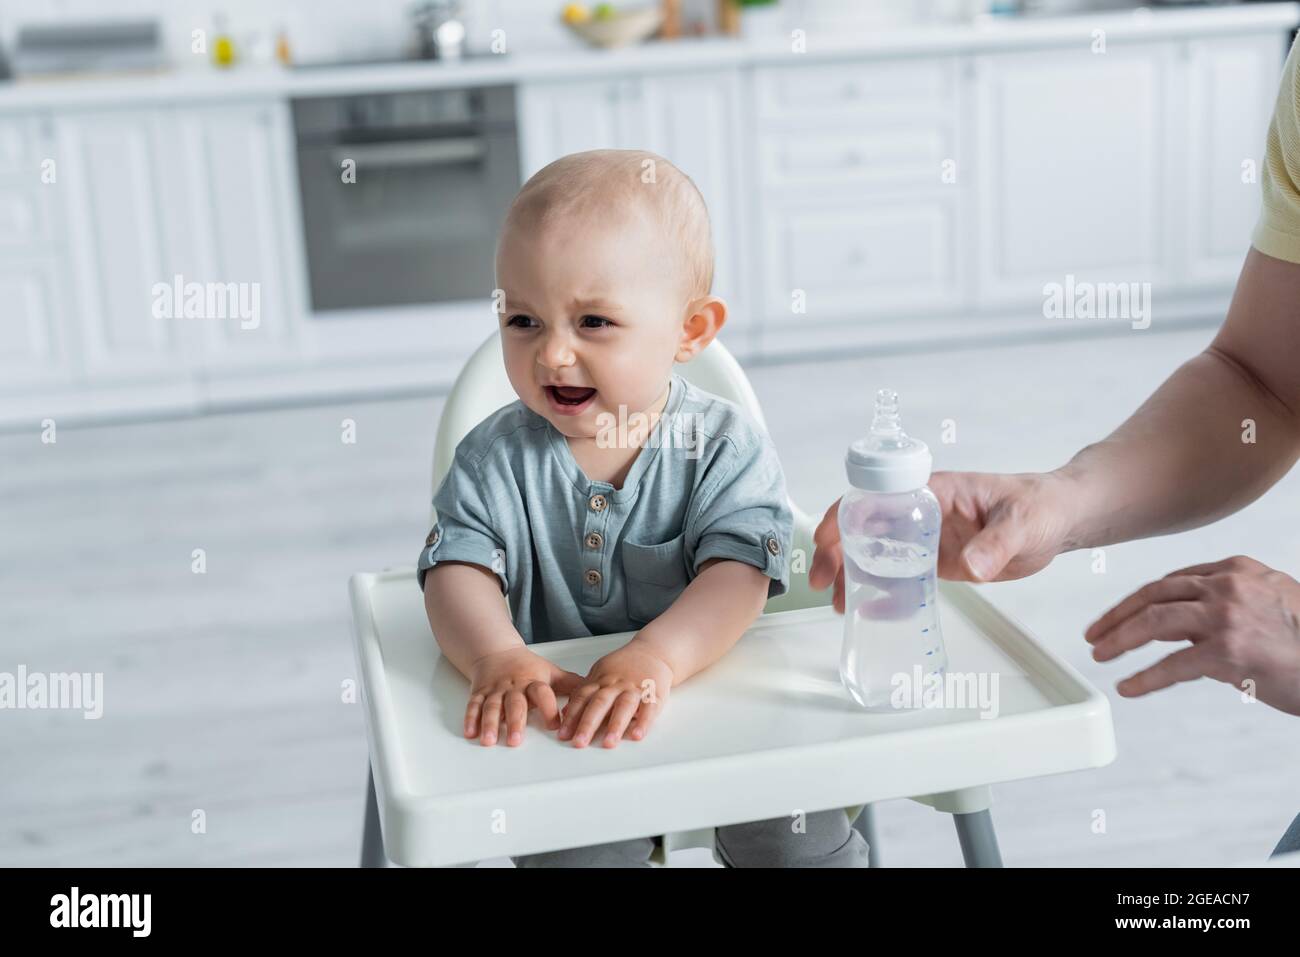 https://c8.alamy.com/comp/2GEACN7/baby-daughter-crying-near-father-and-bottle-on-high-chair-2GEACN7.jpg